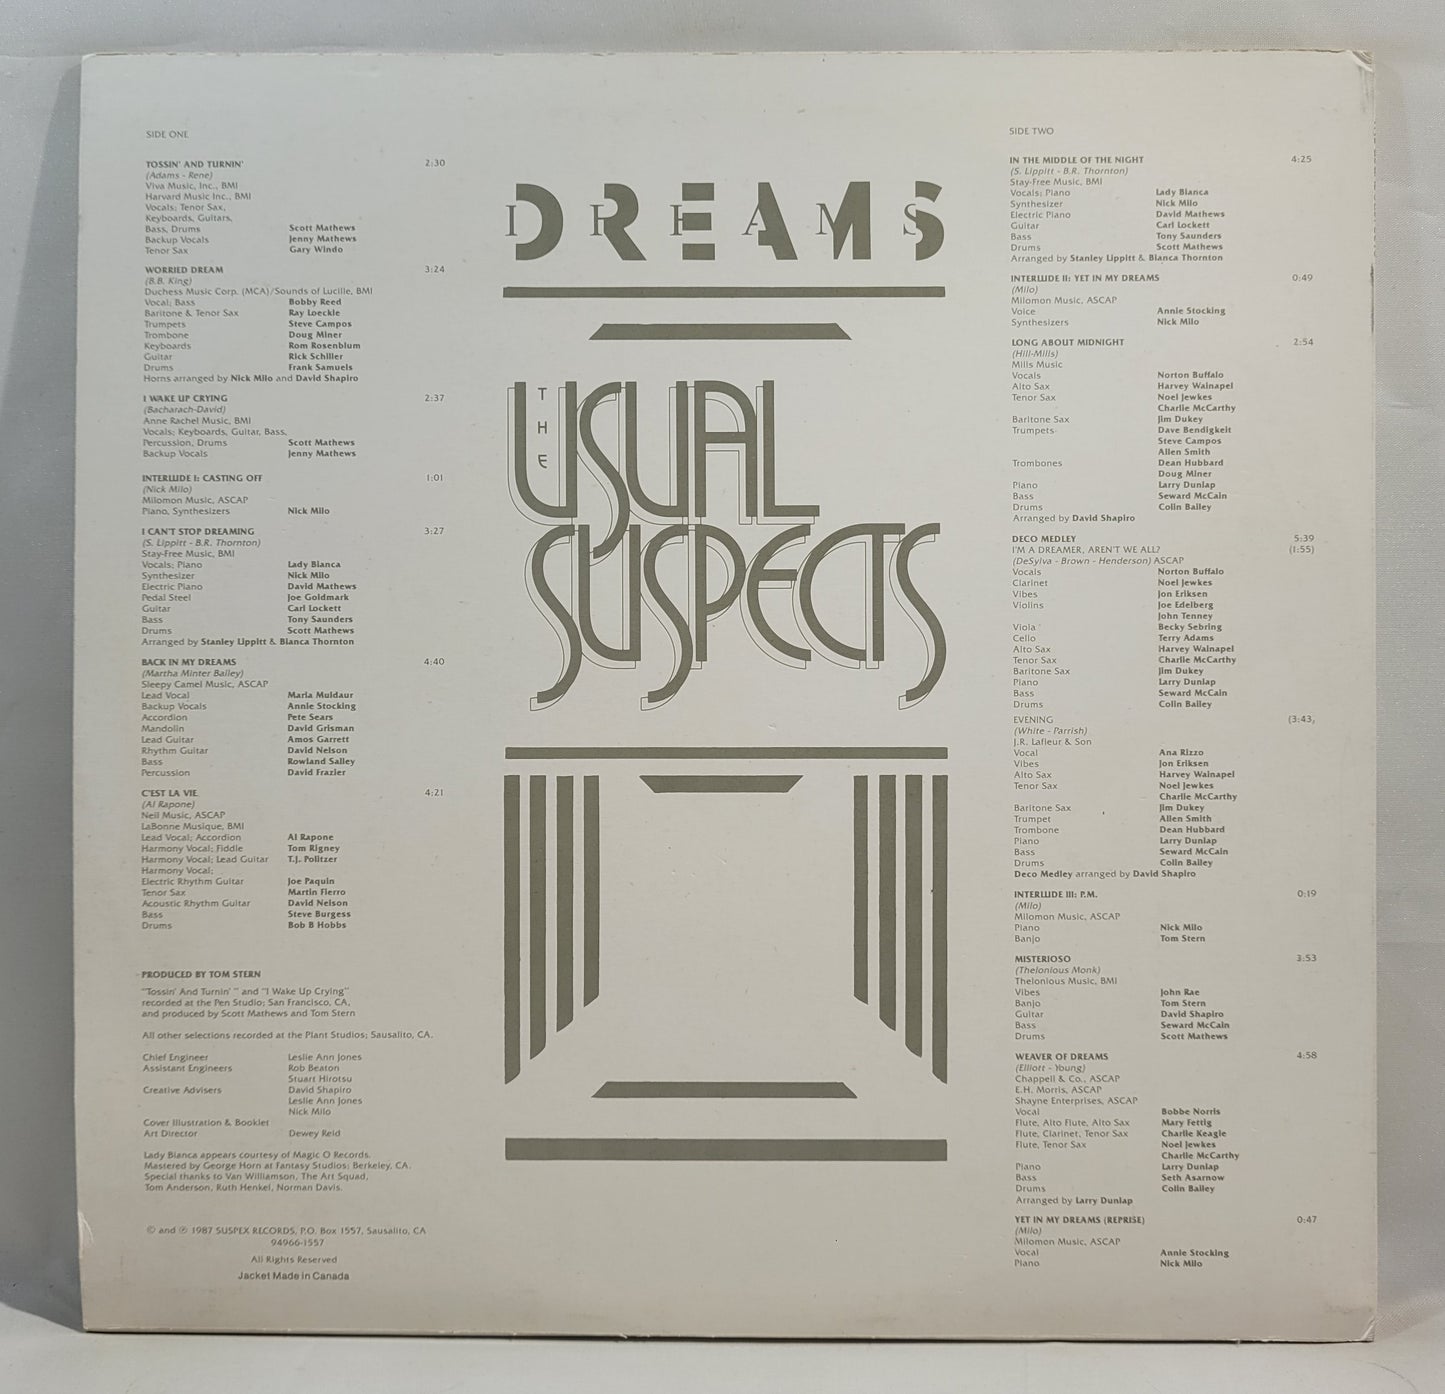 The Usual Suspects - Dreams [Vinyl Record LP]